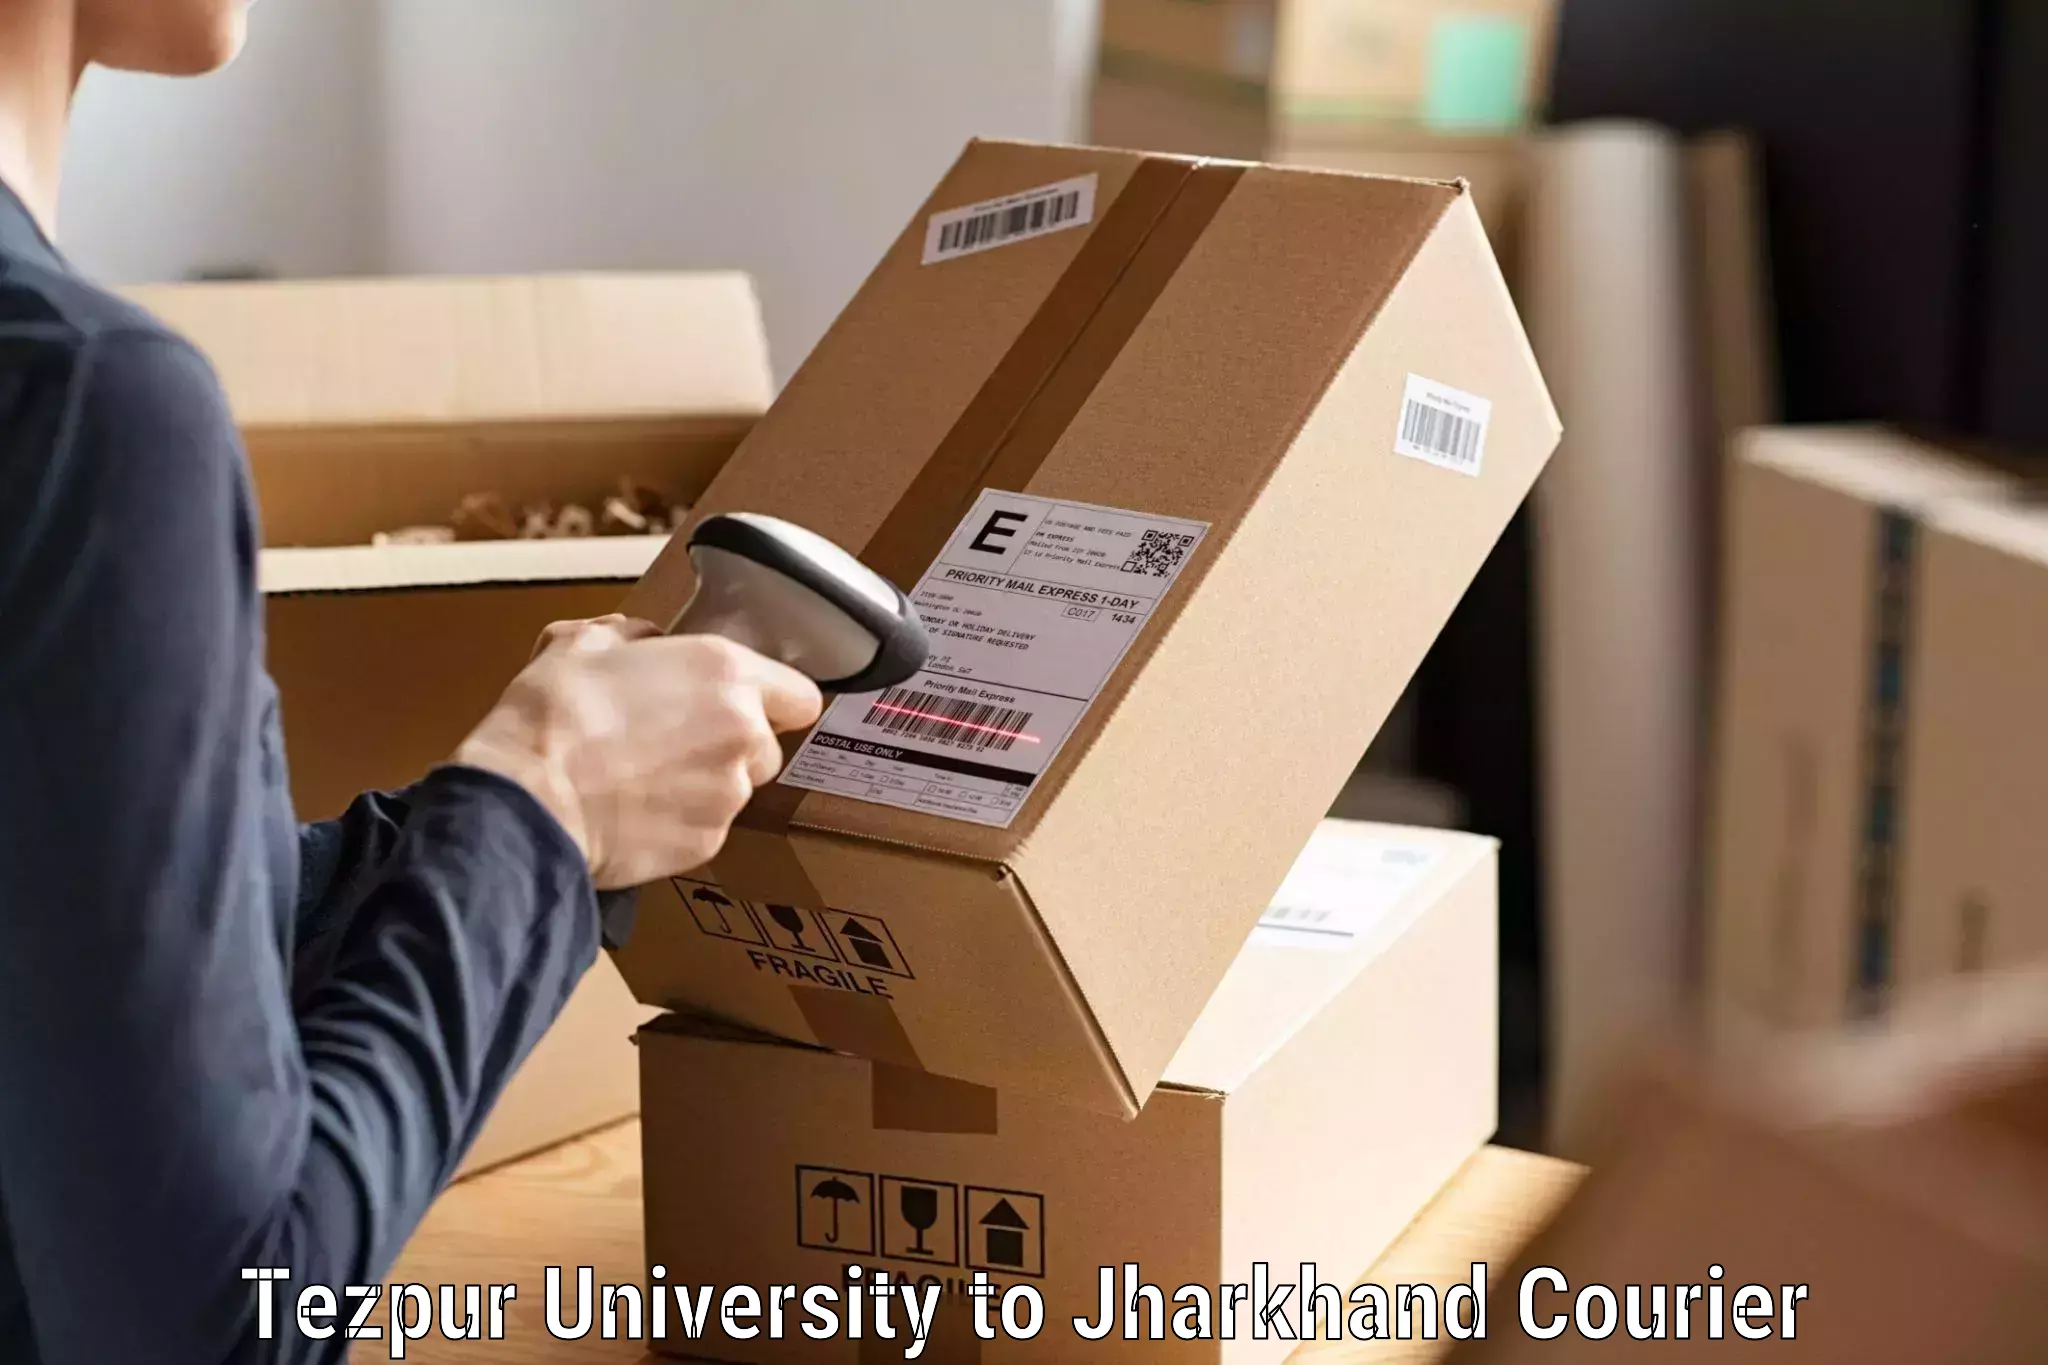 Small business couriers in Tezpur University to Bokaro